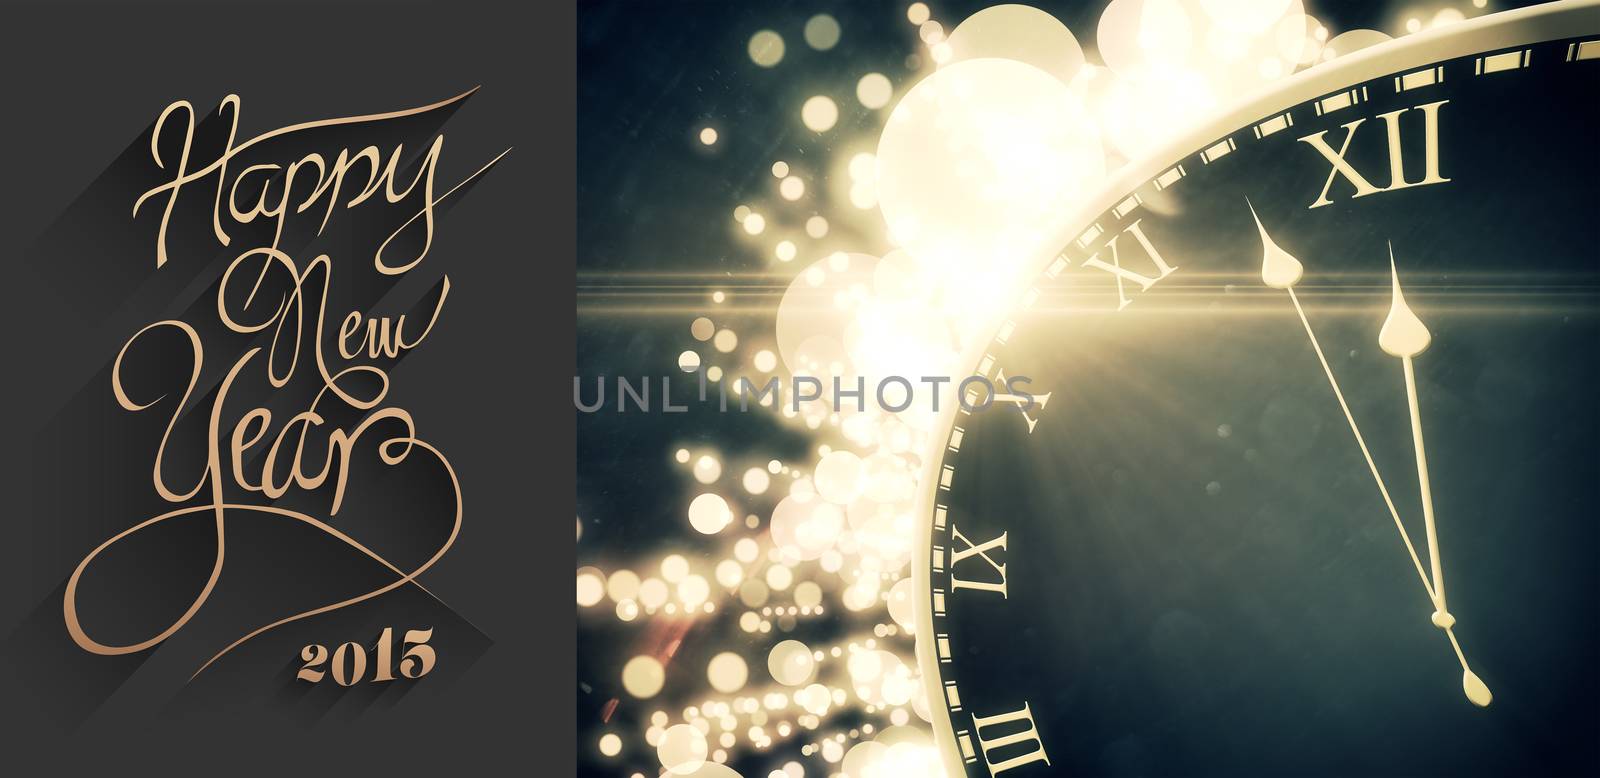 Composite image of classy new year greeting by Wavebreakmedia